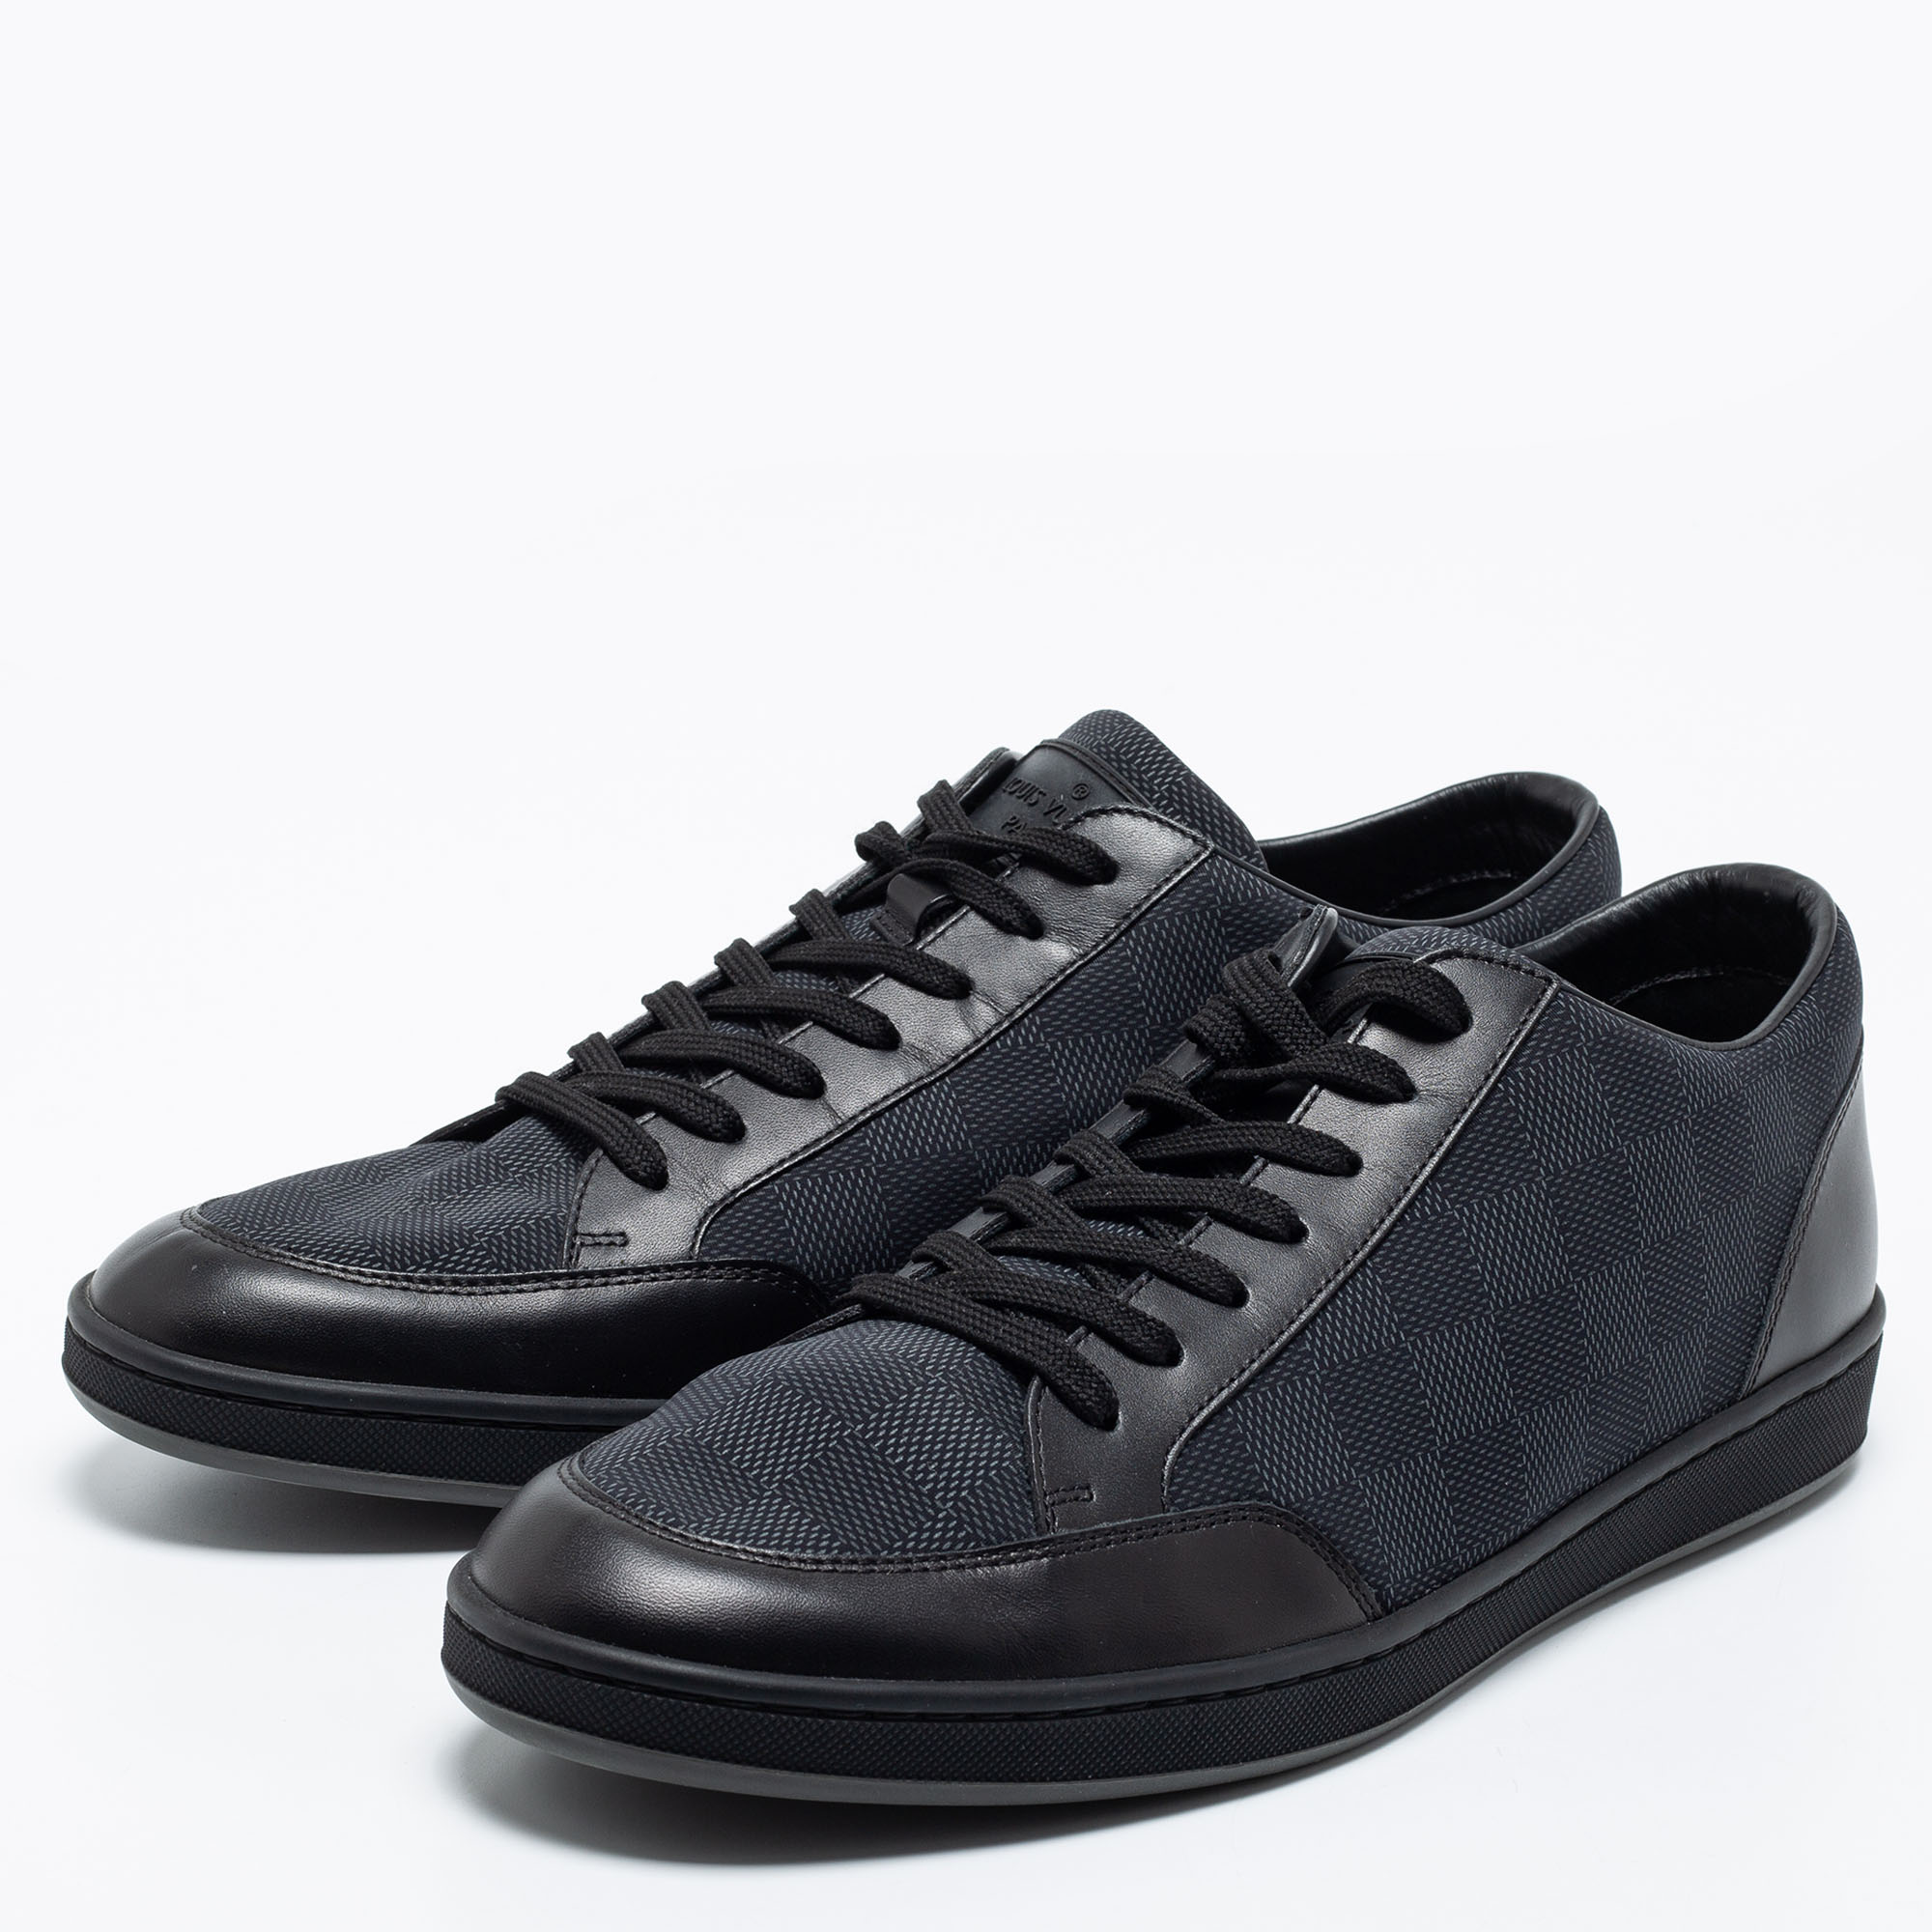 

Louis Vuitton Black Damier Graphite Canvas and Leather Offshore Sneakers Size